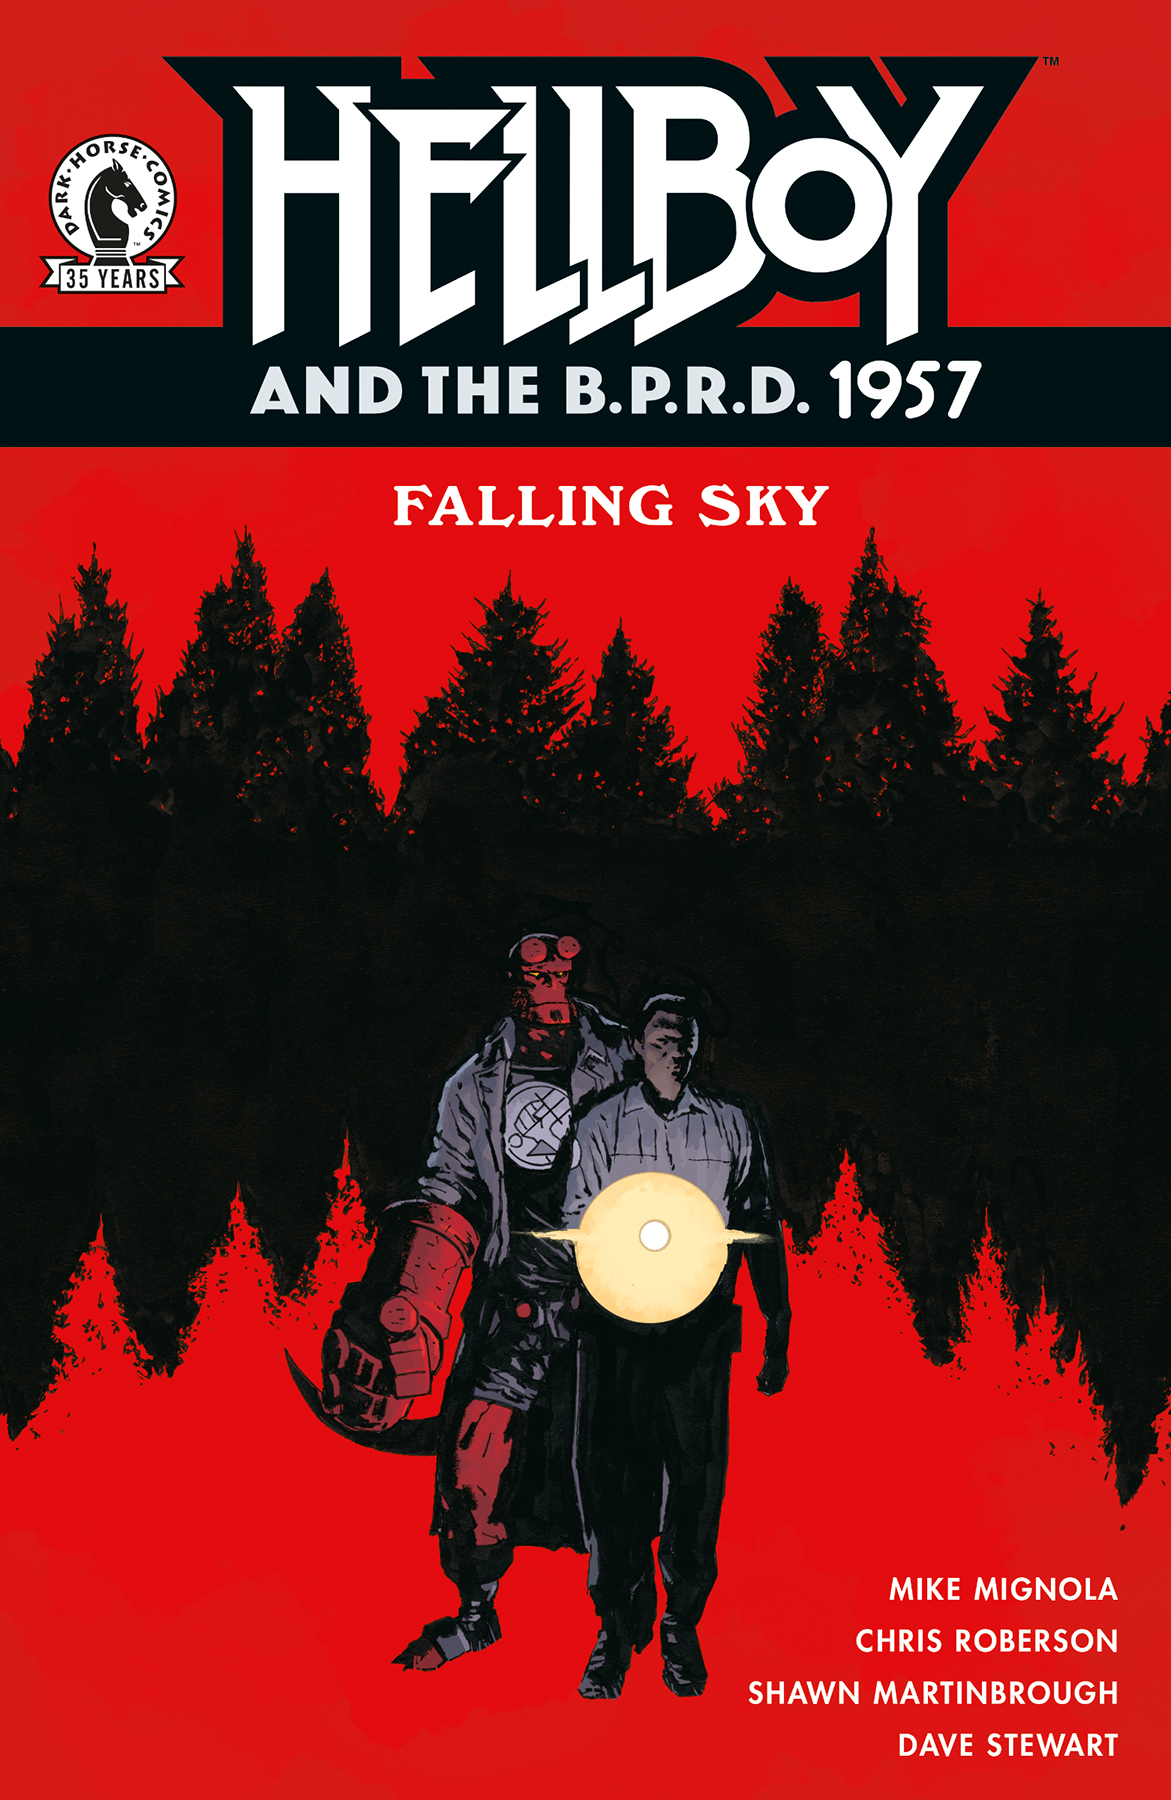 Hellboy & the B.P.R.D. Ongoing #53 Hellboy & The B.P.R.D. 1957 Falling Sky (One-Shot)